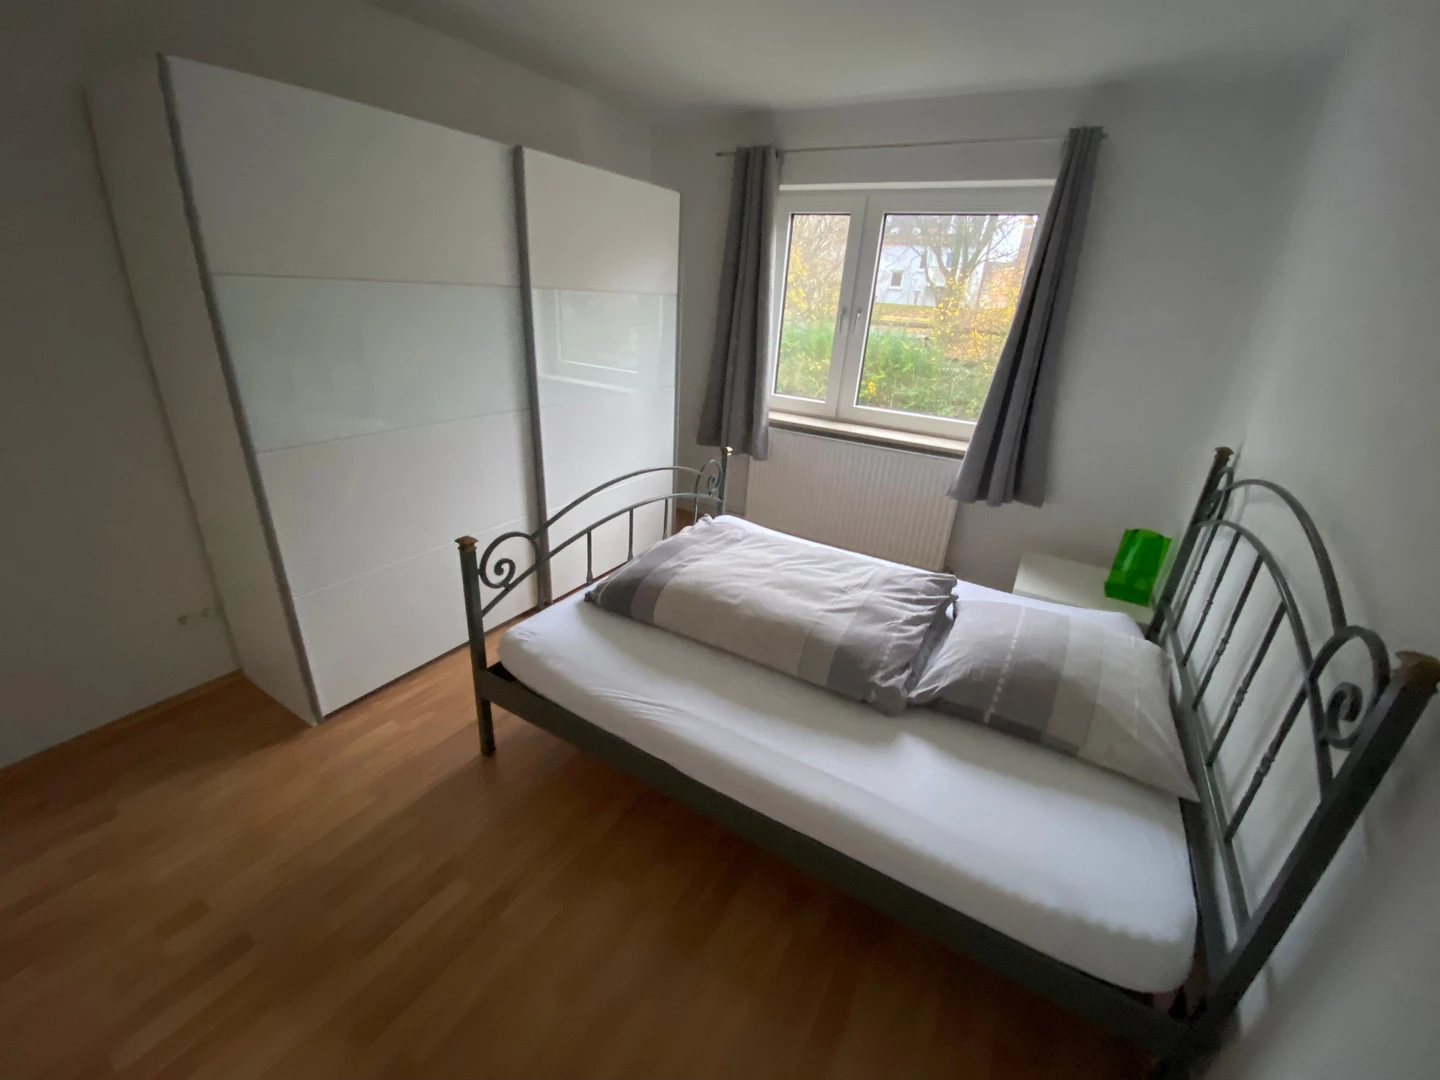 Room for rent in a shared flat in Kiel